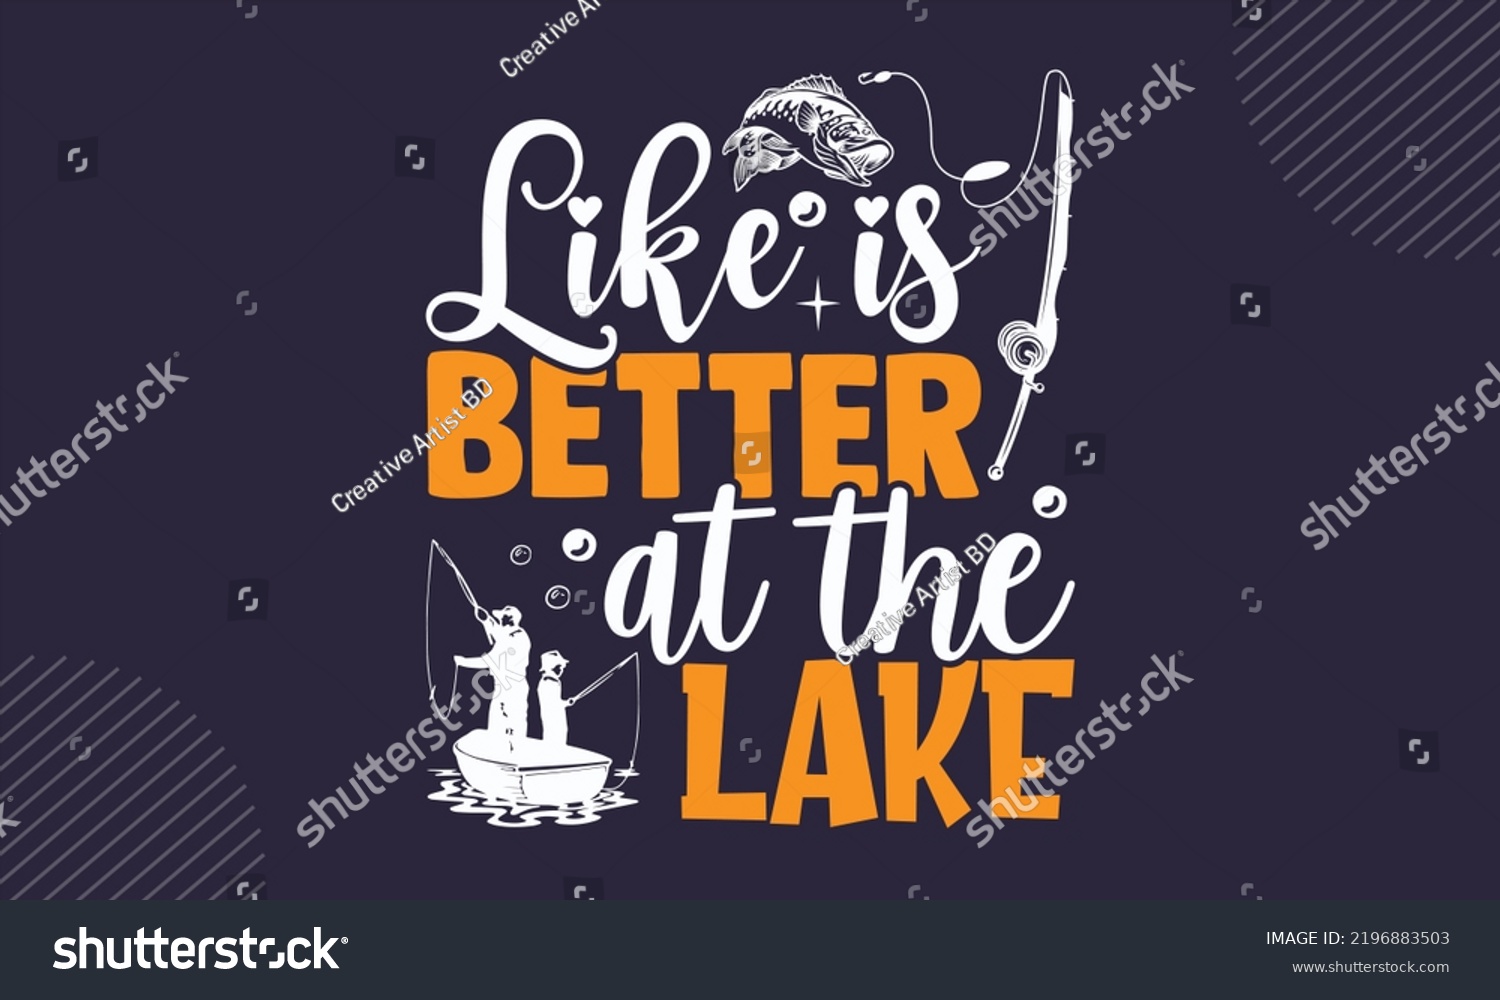 SVG of Like Is Better At The Lake - Fishing T shirt Design, Hand drawn vintage illustration with hand-lettering and decoration elements, Cut Files for Cricut Svg, Digital Download svg